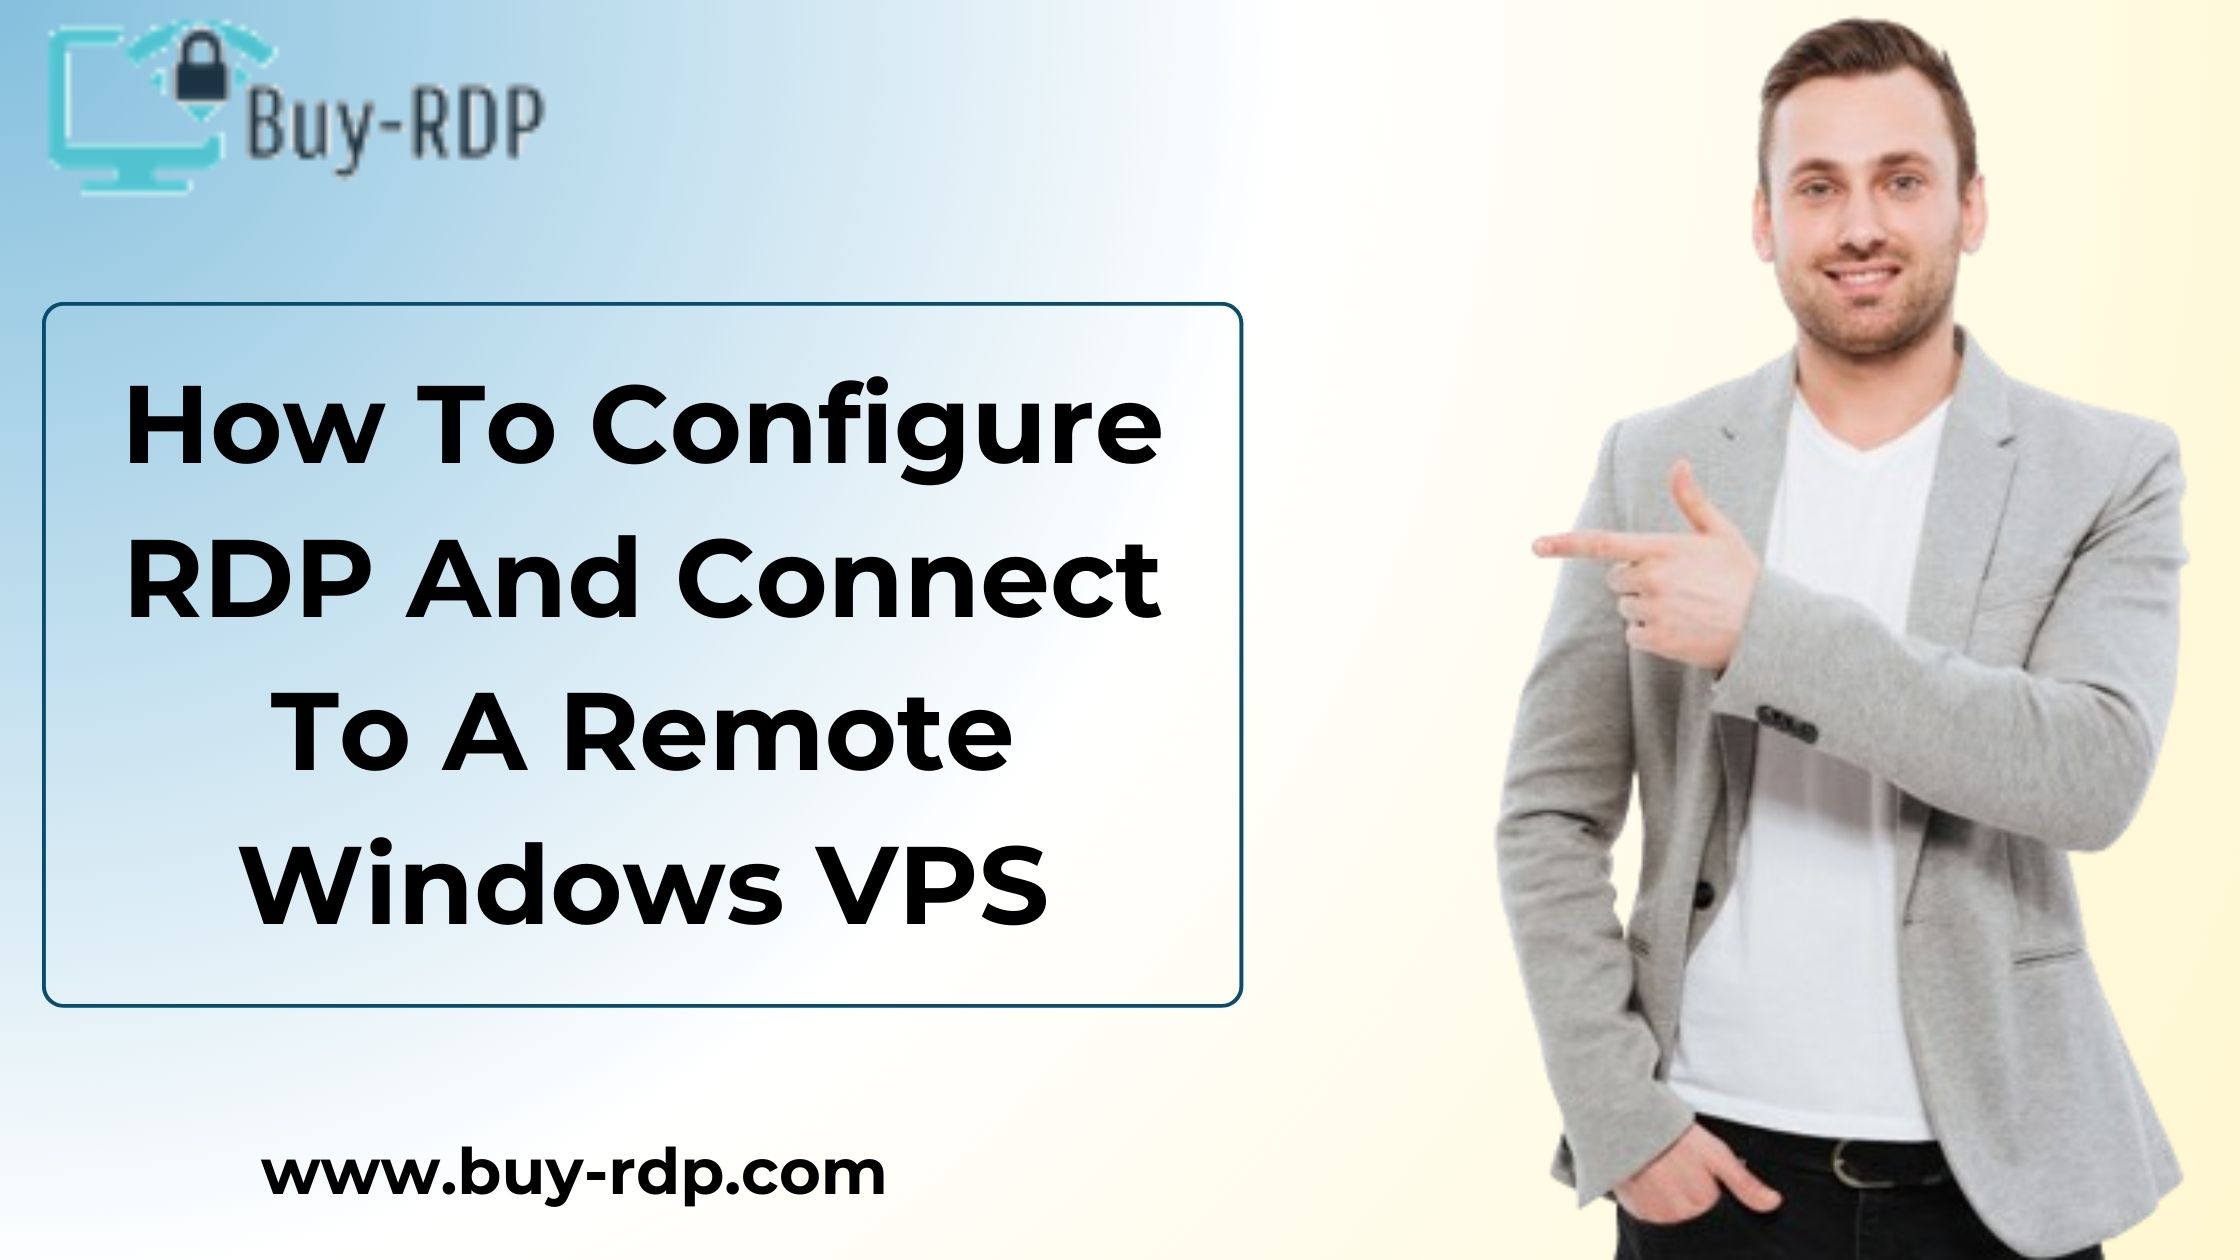 How To Configure RDP And Connect To A Remote Windows VPS